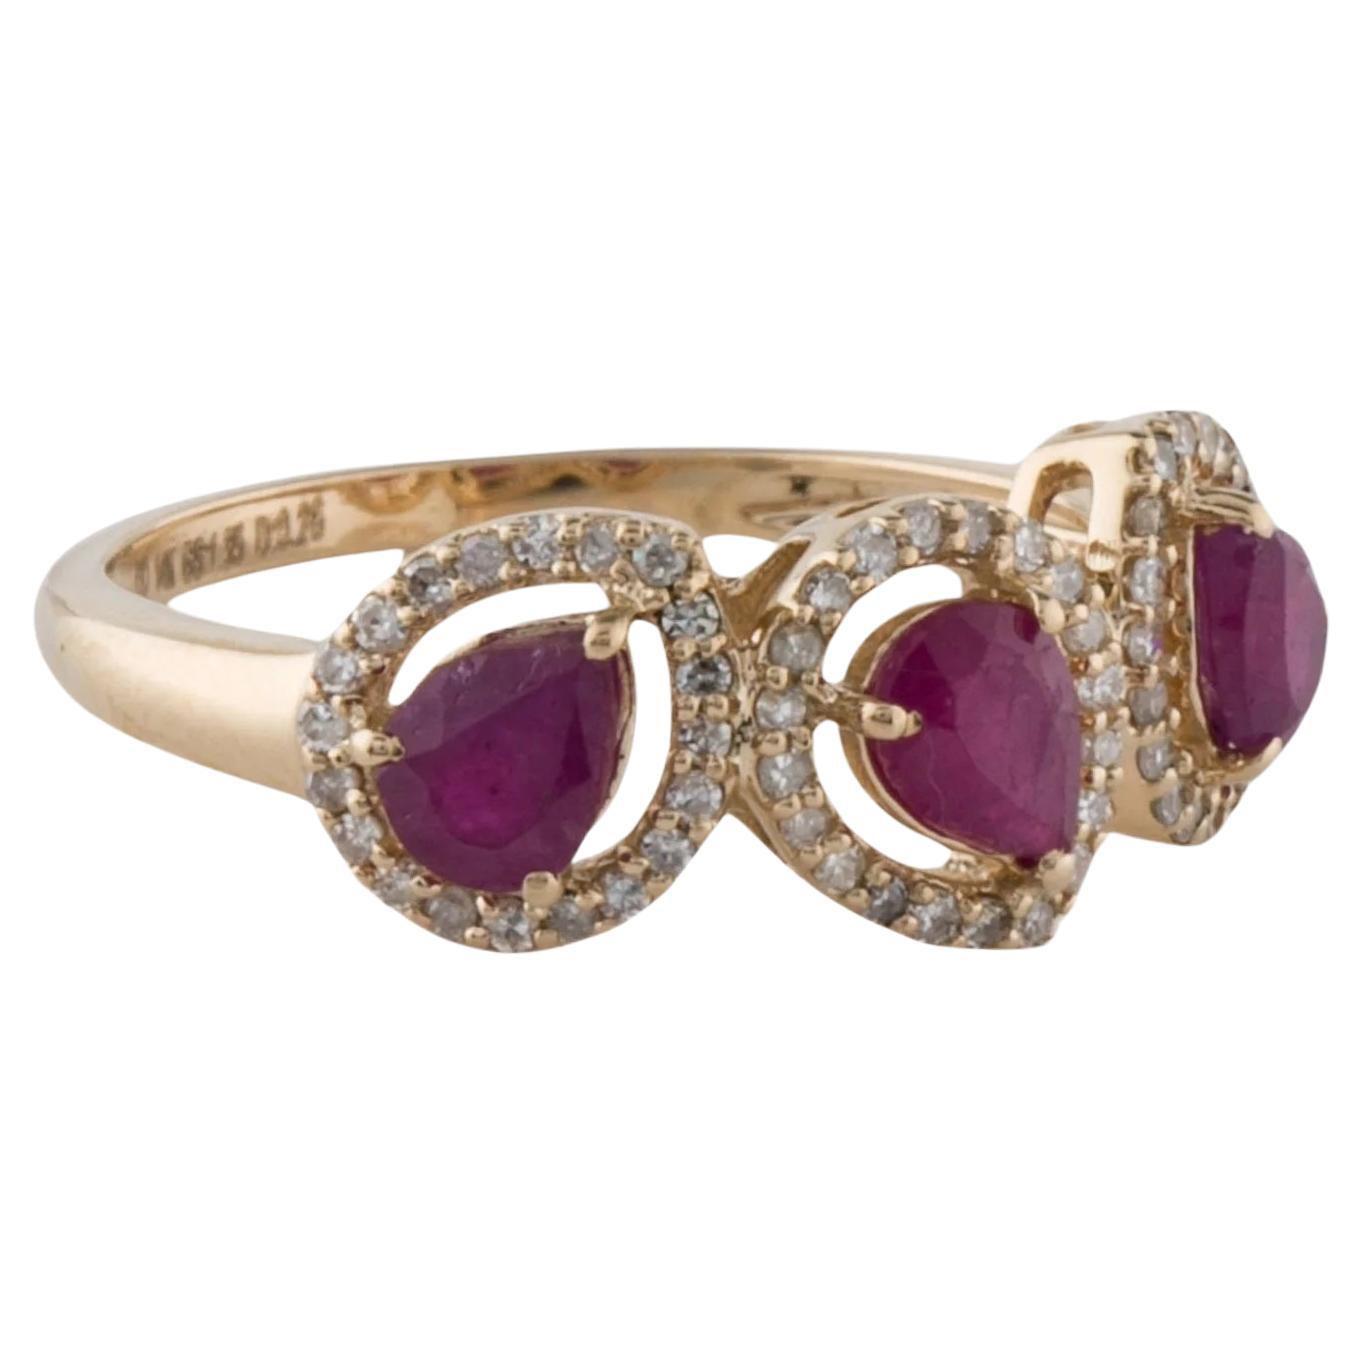 14K 1.35ctw Ruby & Diamond Cocktail Ring - Size 7